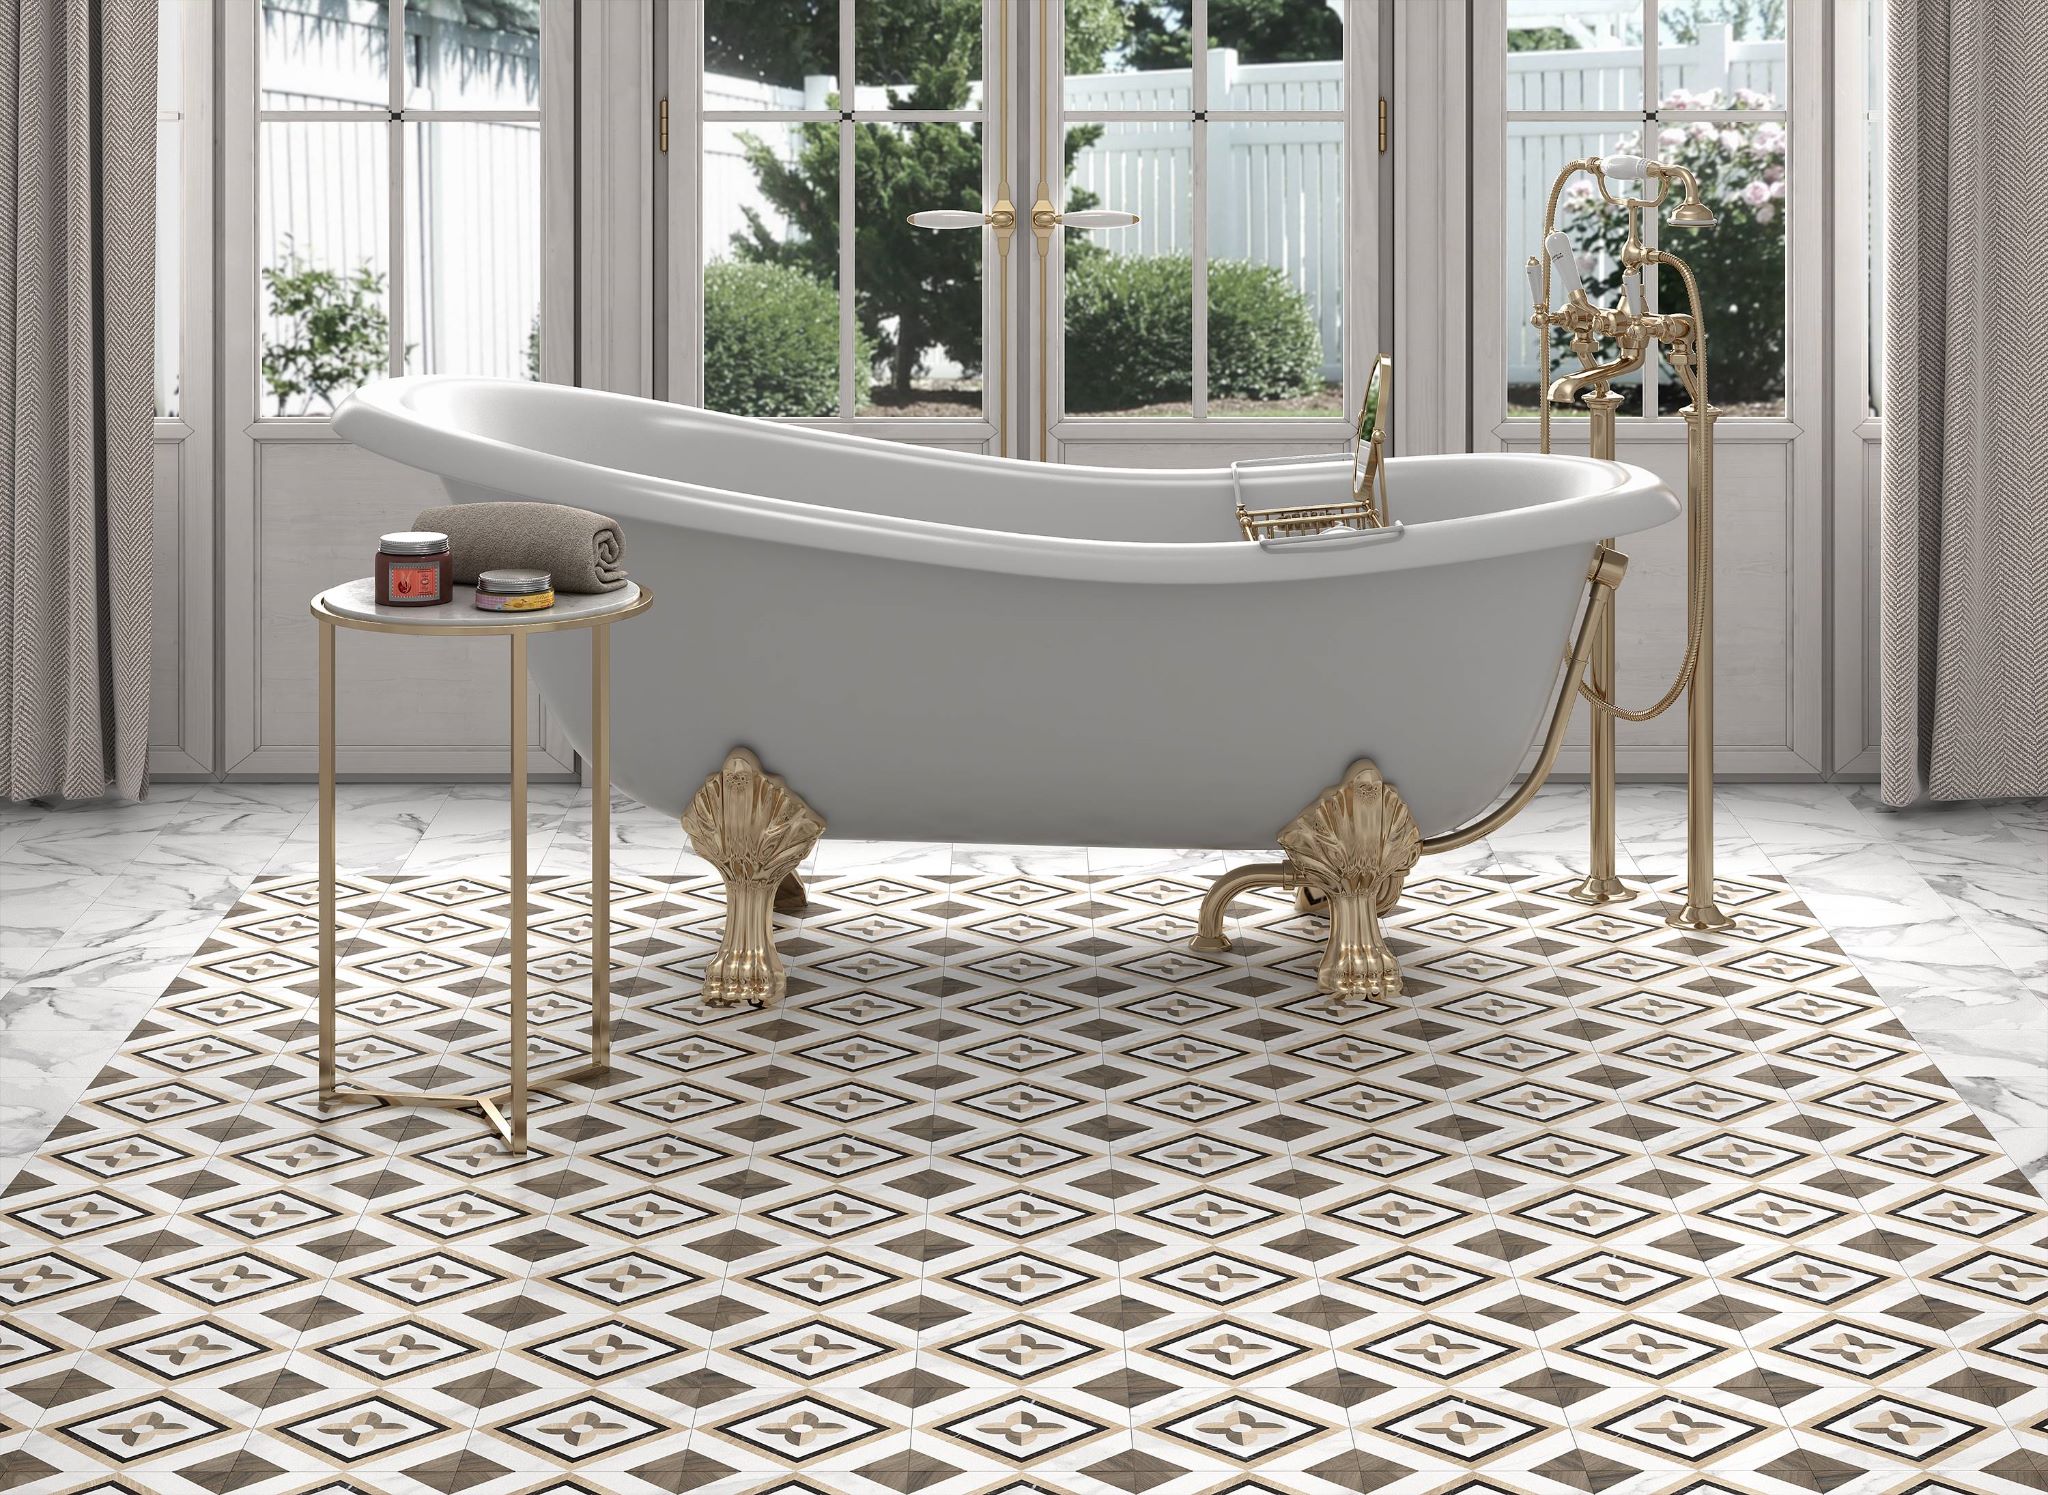 Artwood 2 | Stones & More | Finest selection of Mosaics, Glass, Tile and Stone